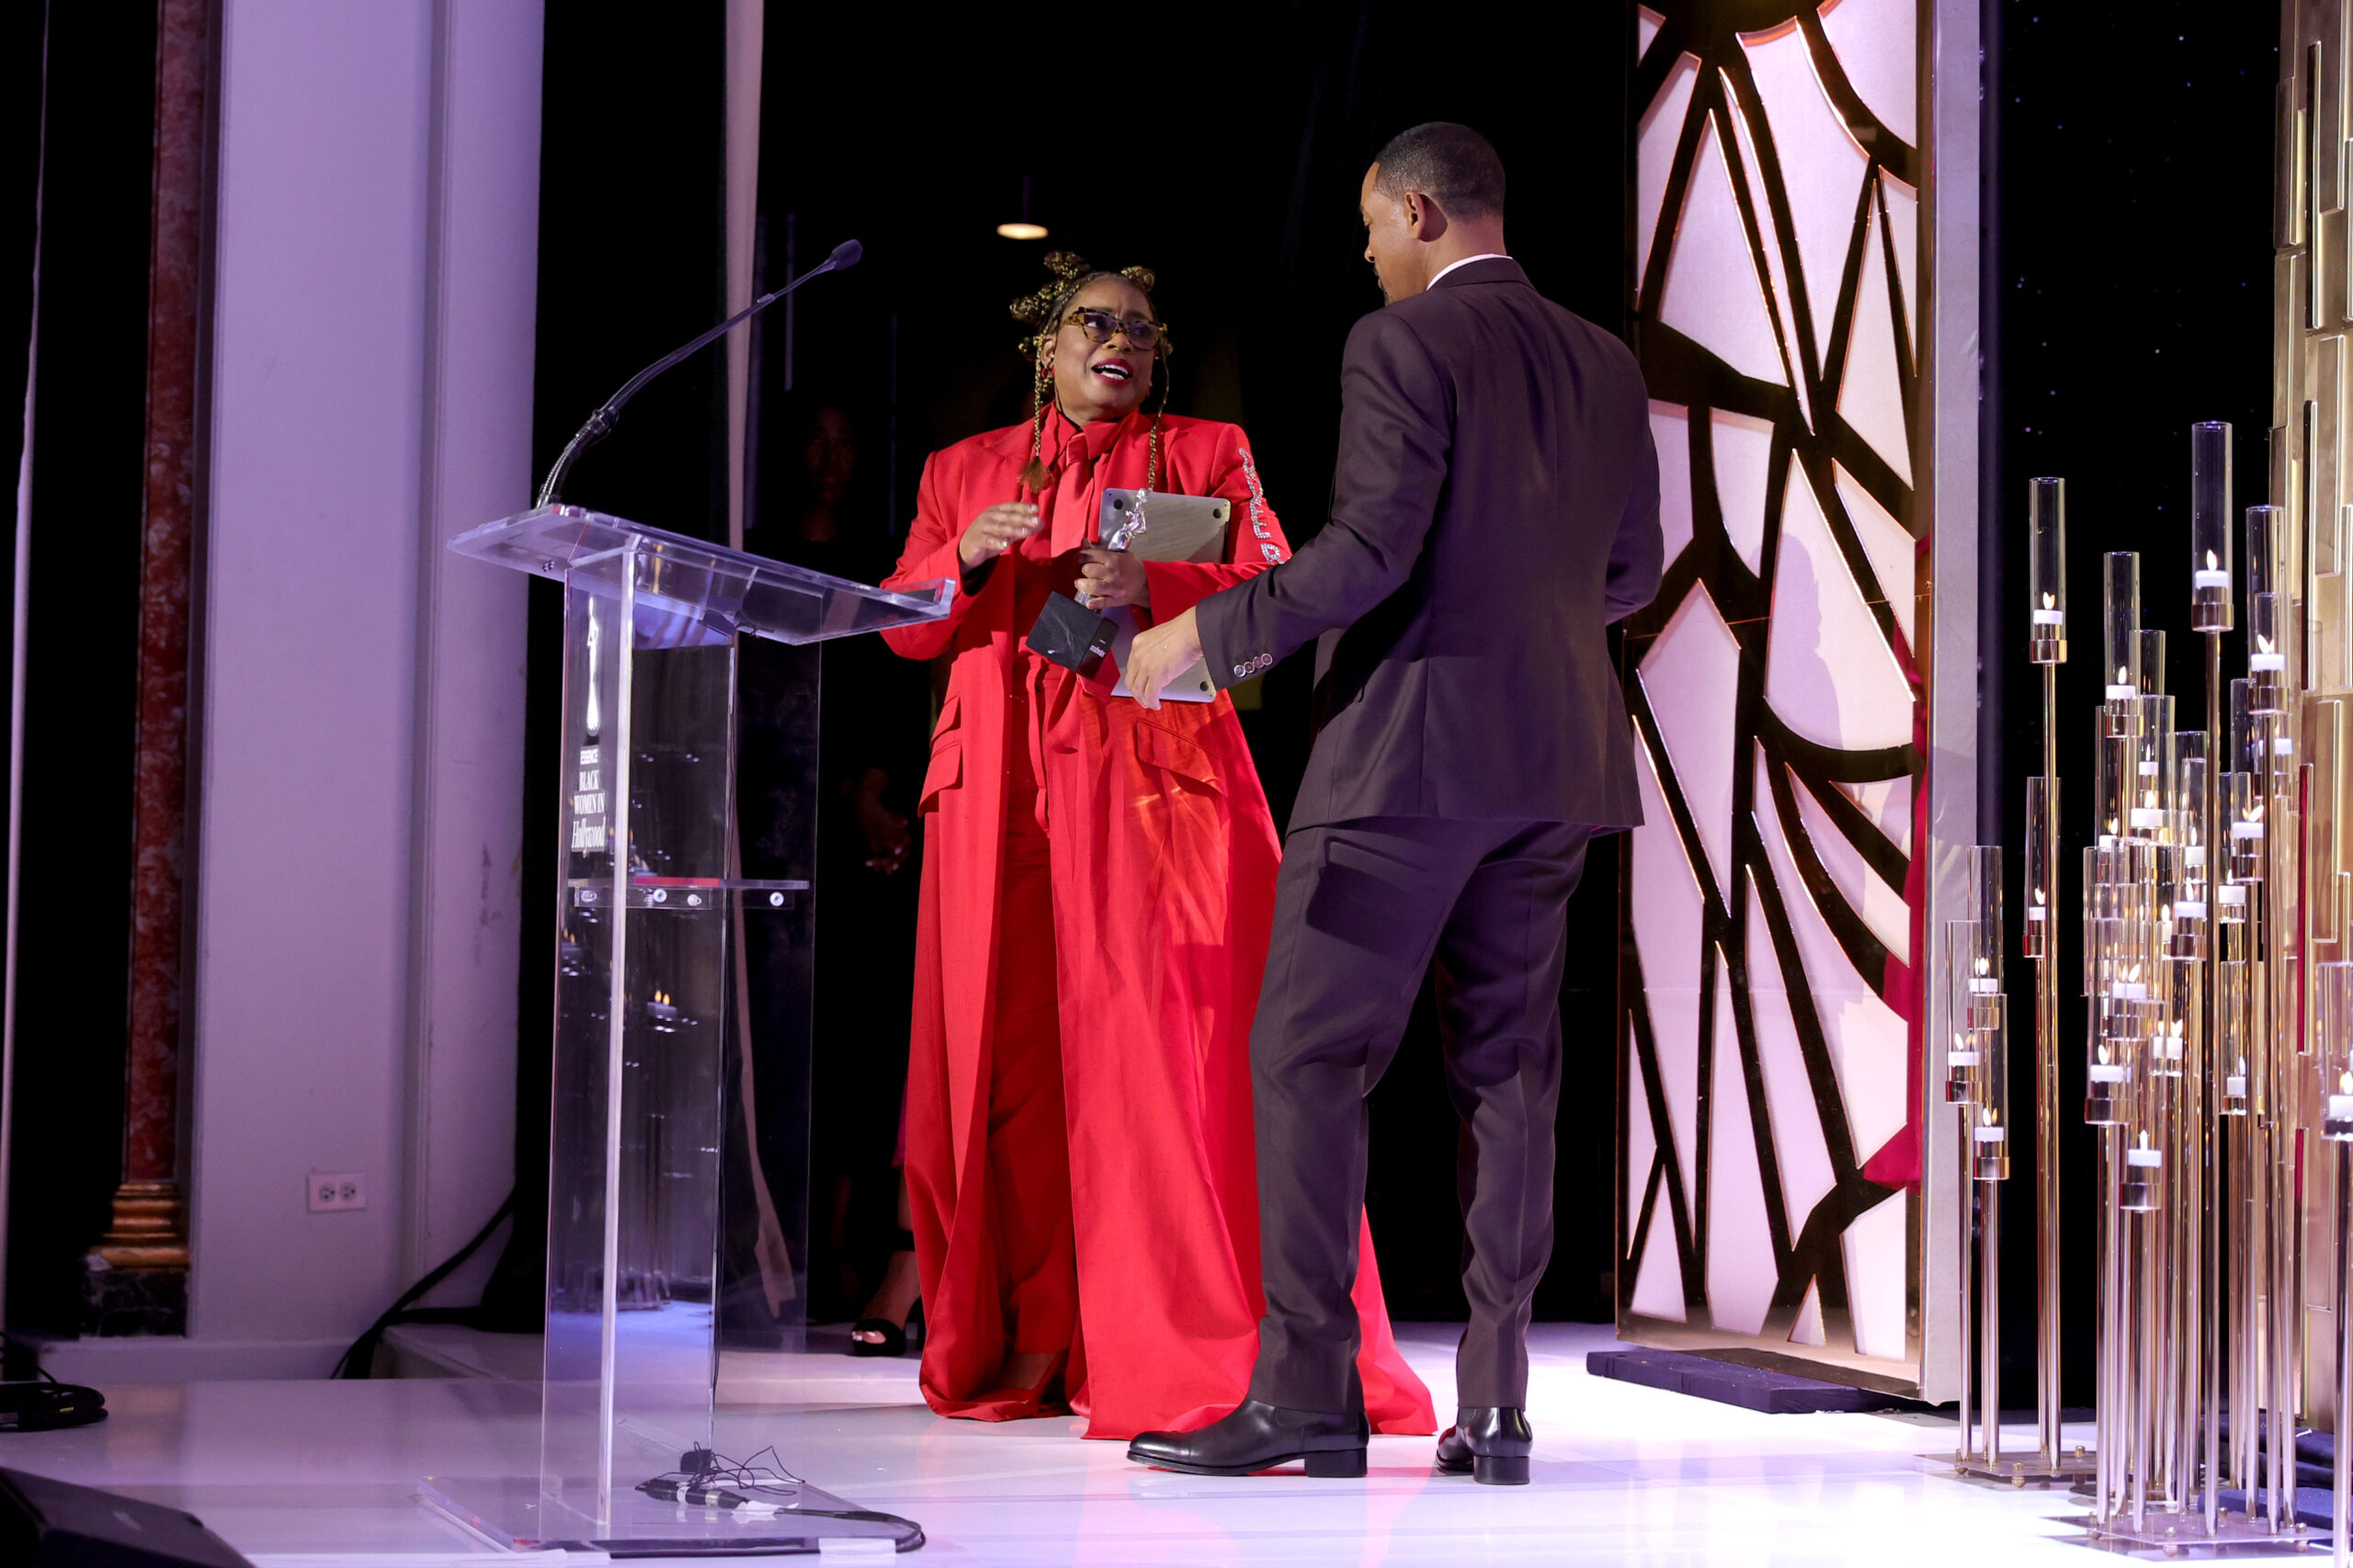 We Gave Our Stars Their Flowers During ESSENCE Black Women In Hollywood